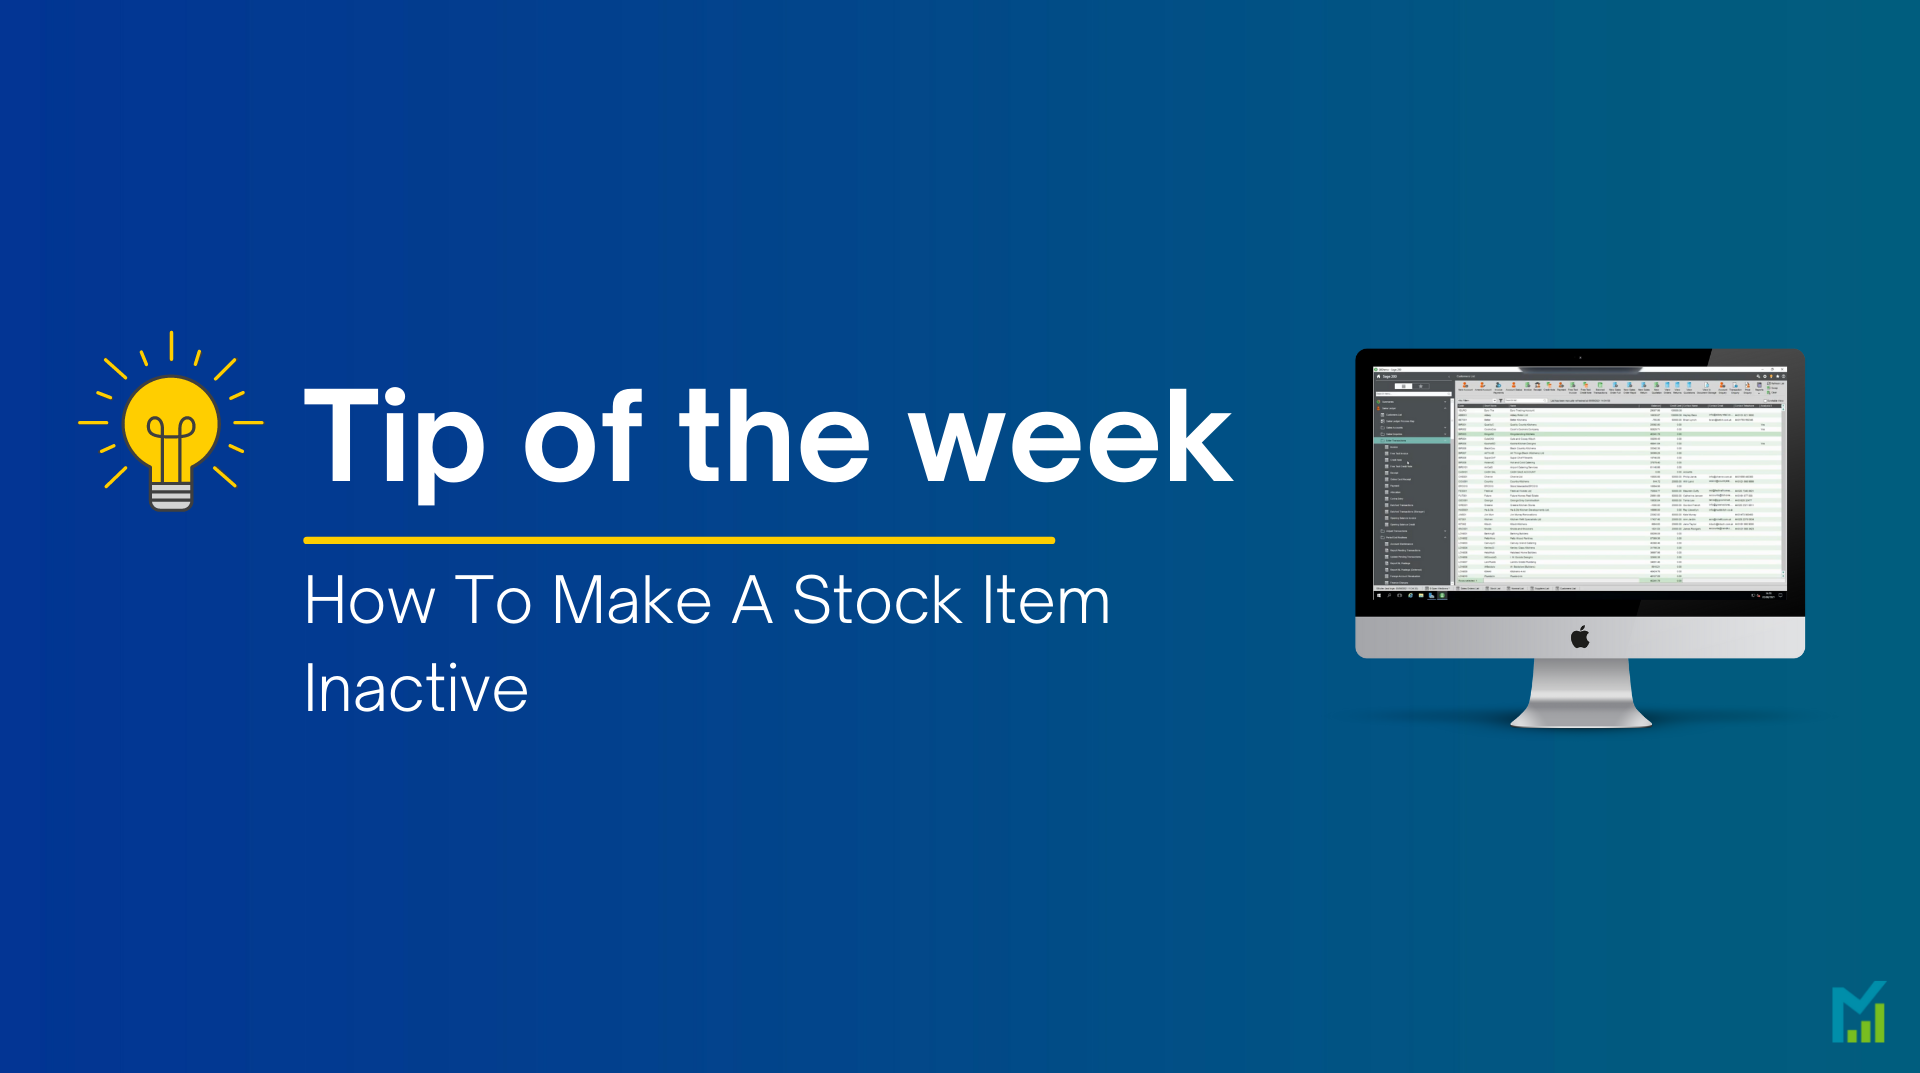 How To Make A Stock Item Inactive